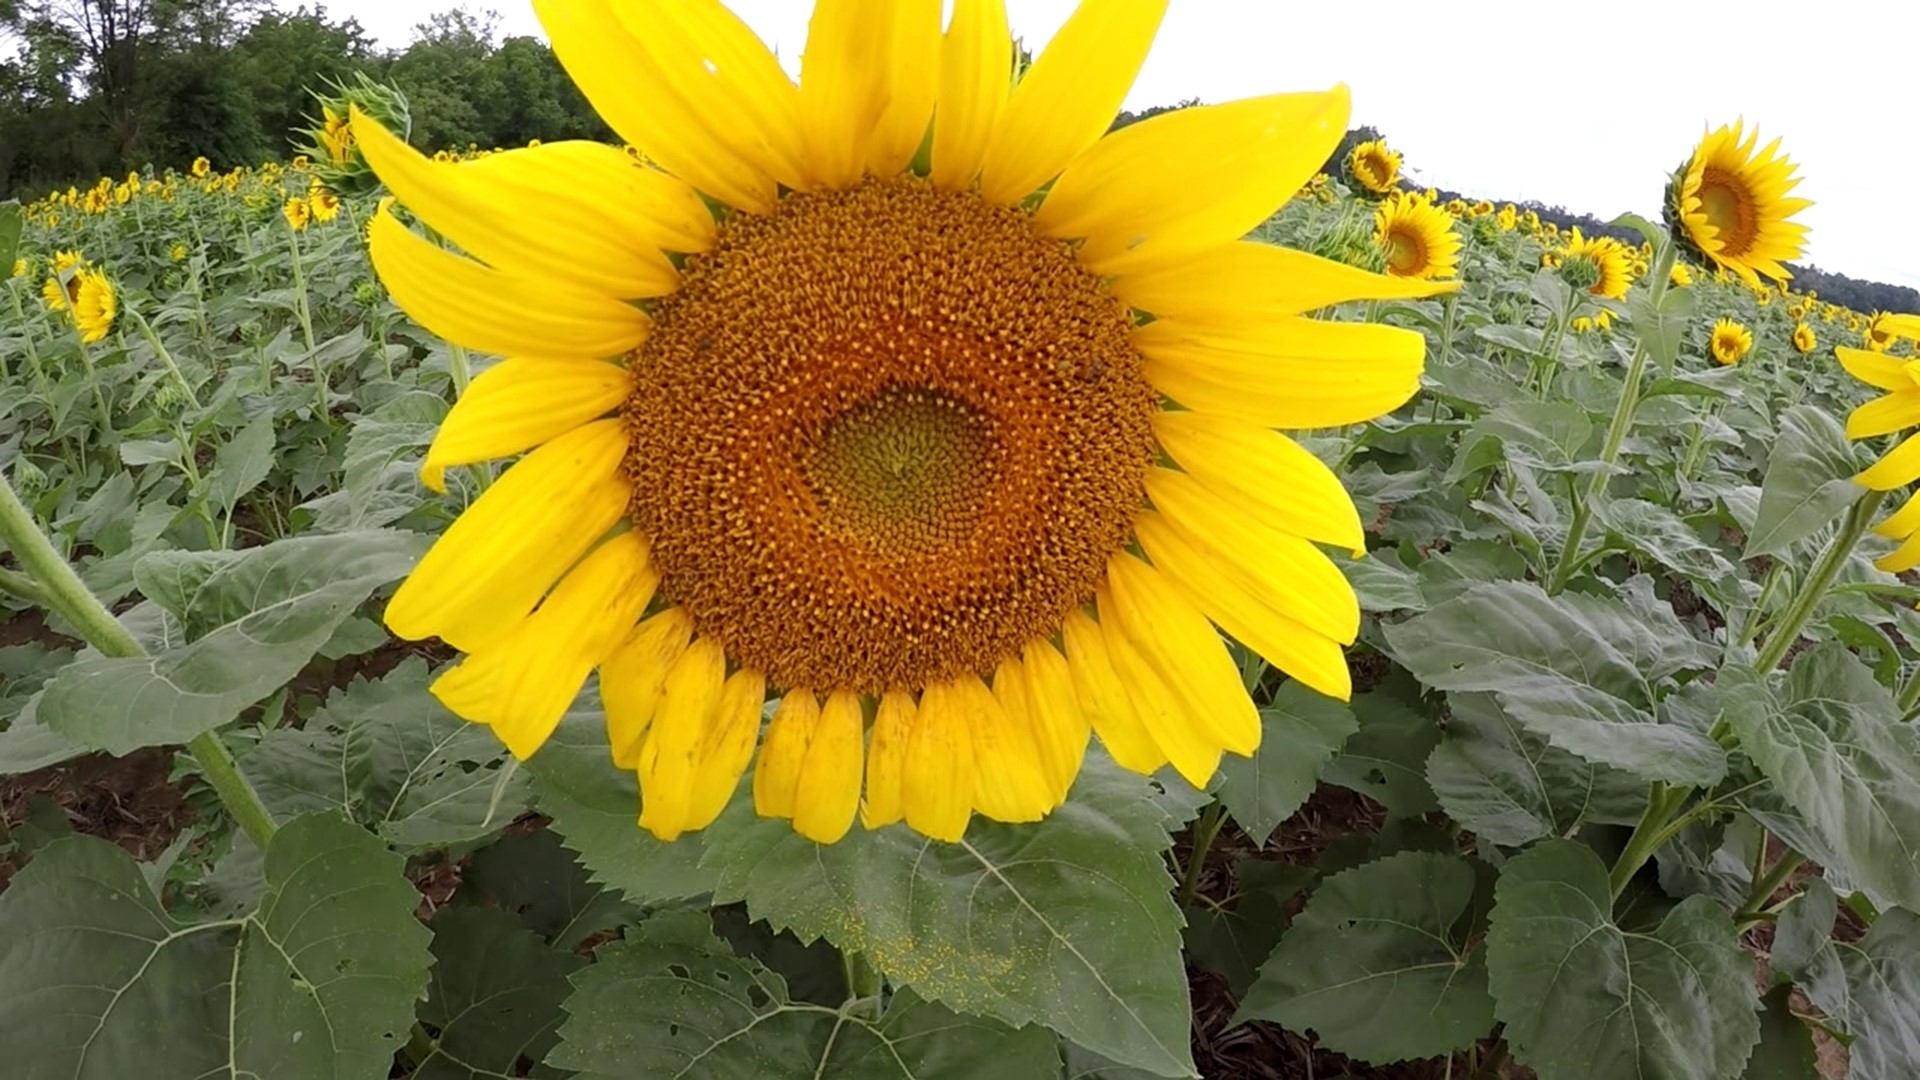 Jon Meyers found the sunflowers that were popping up on our social media feeds On the Pennsylvania Road.